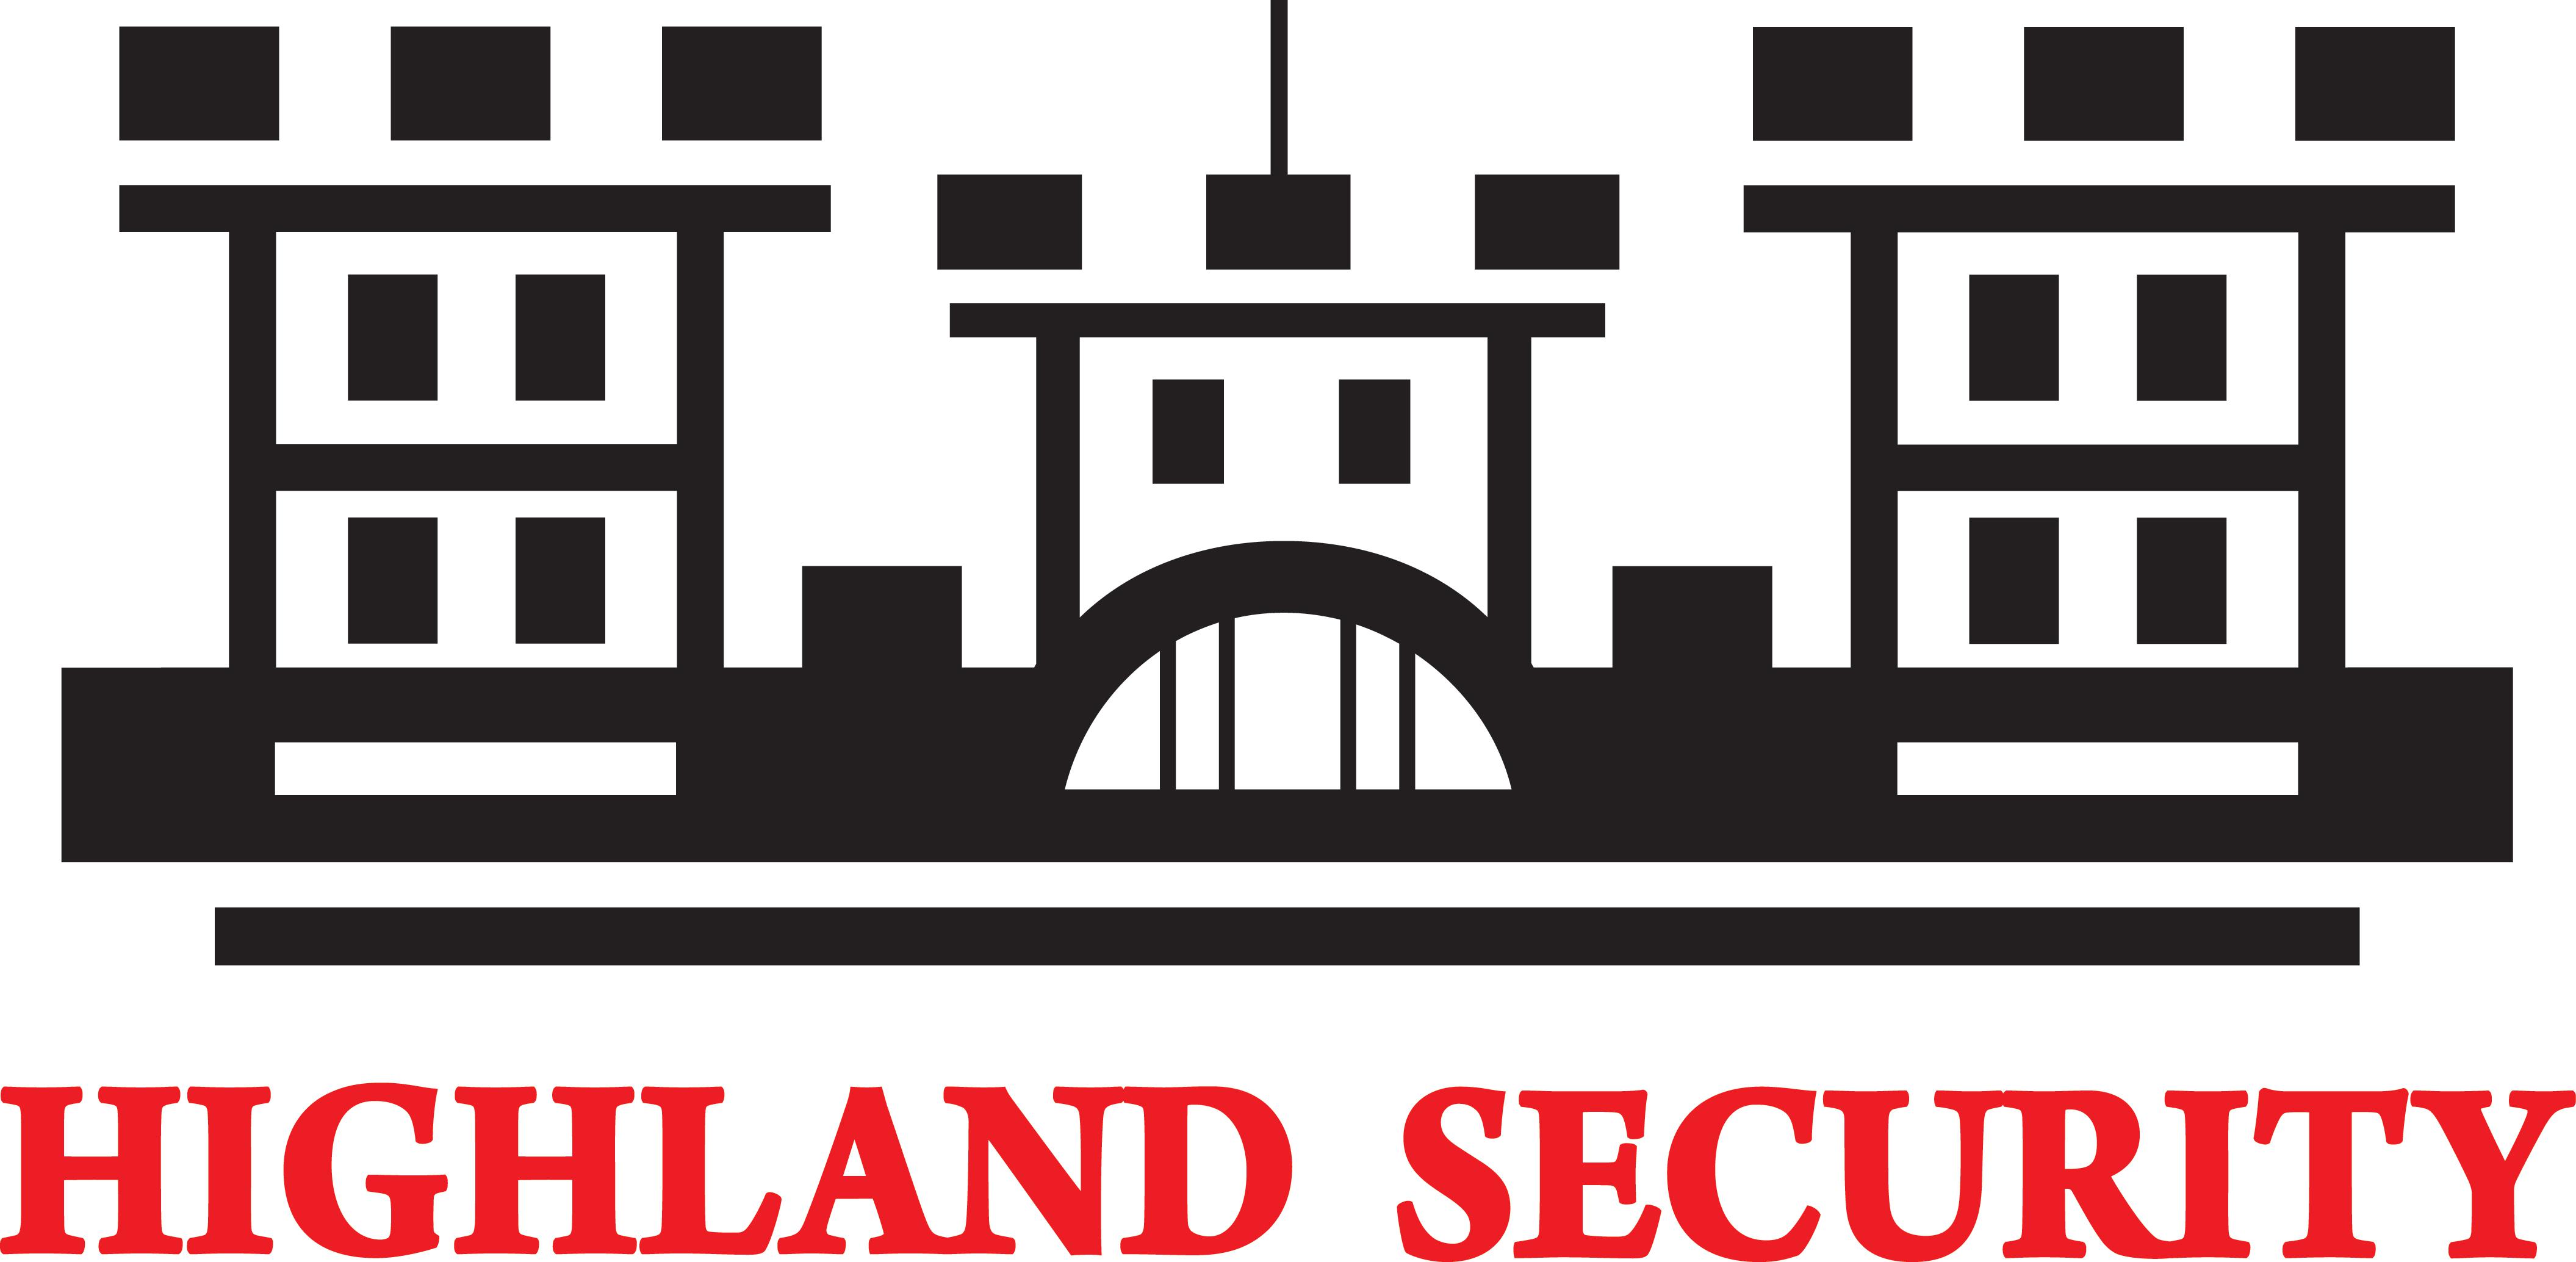 Highland Security Services Castle Hill (02) 9680 9419